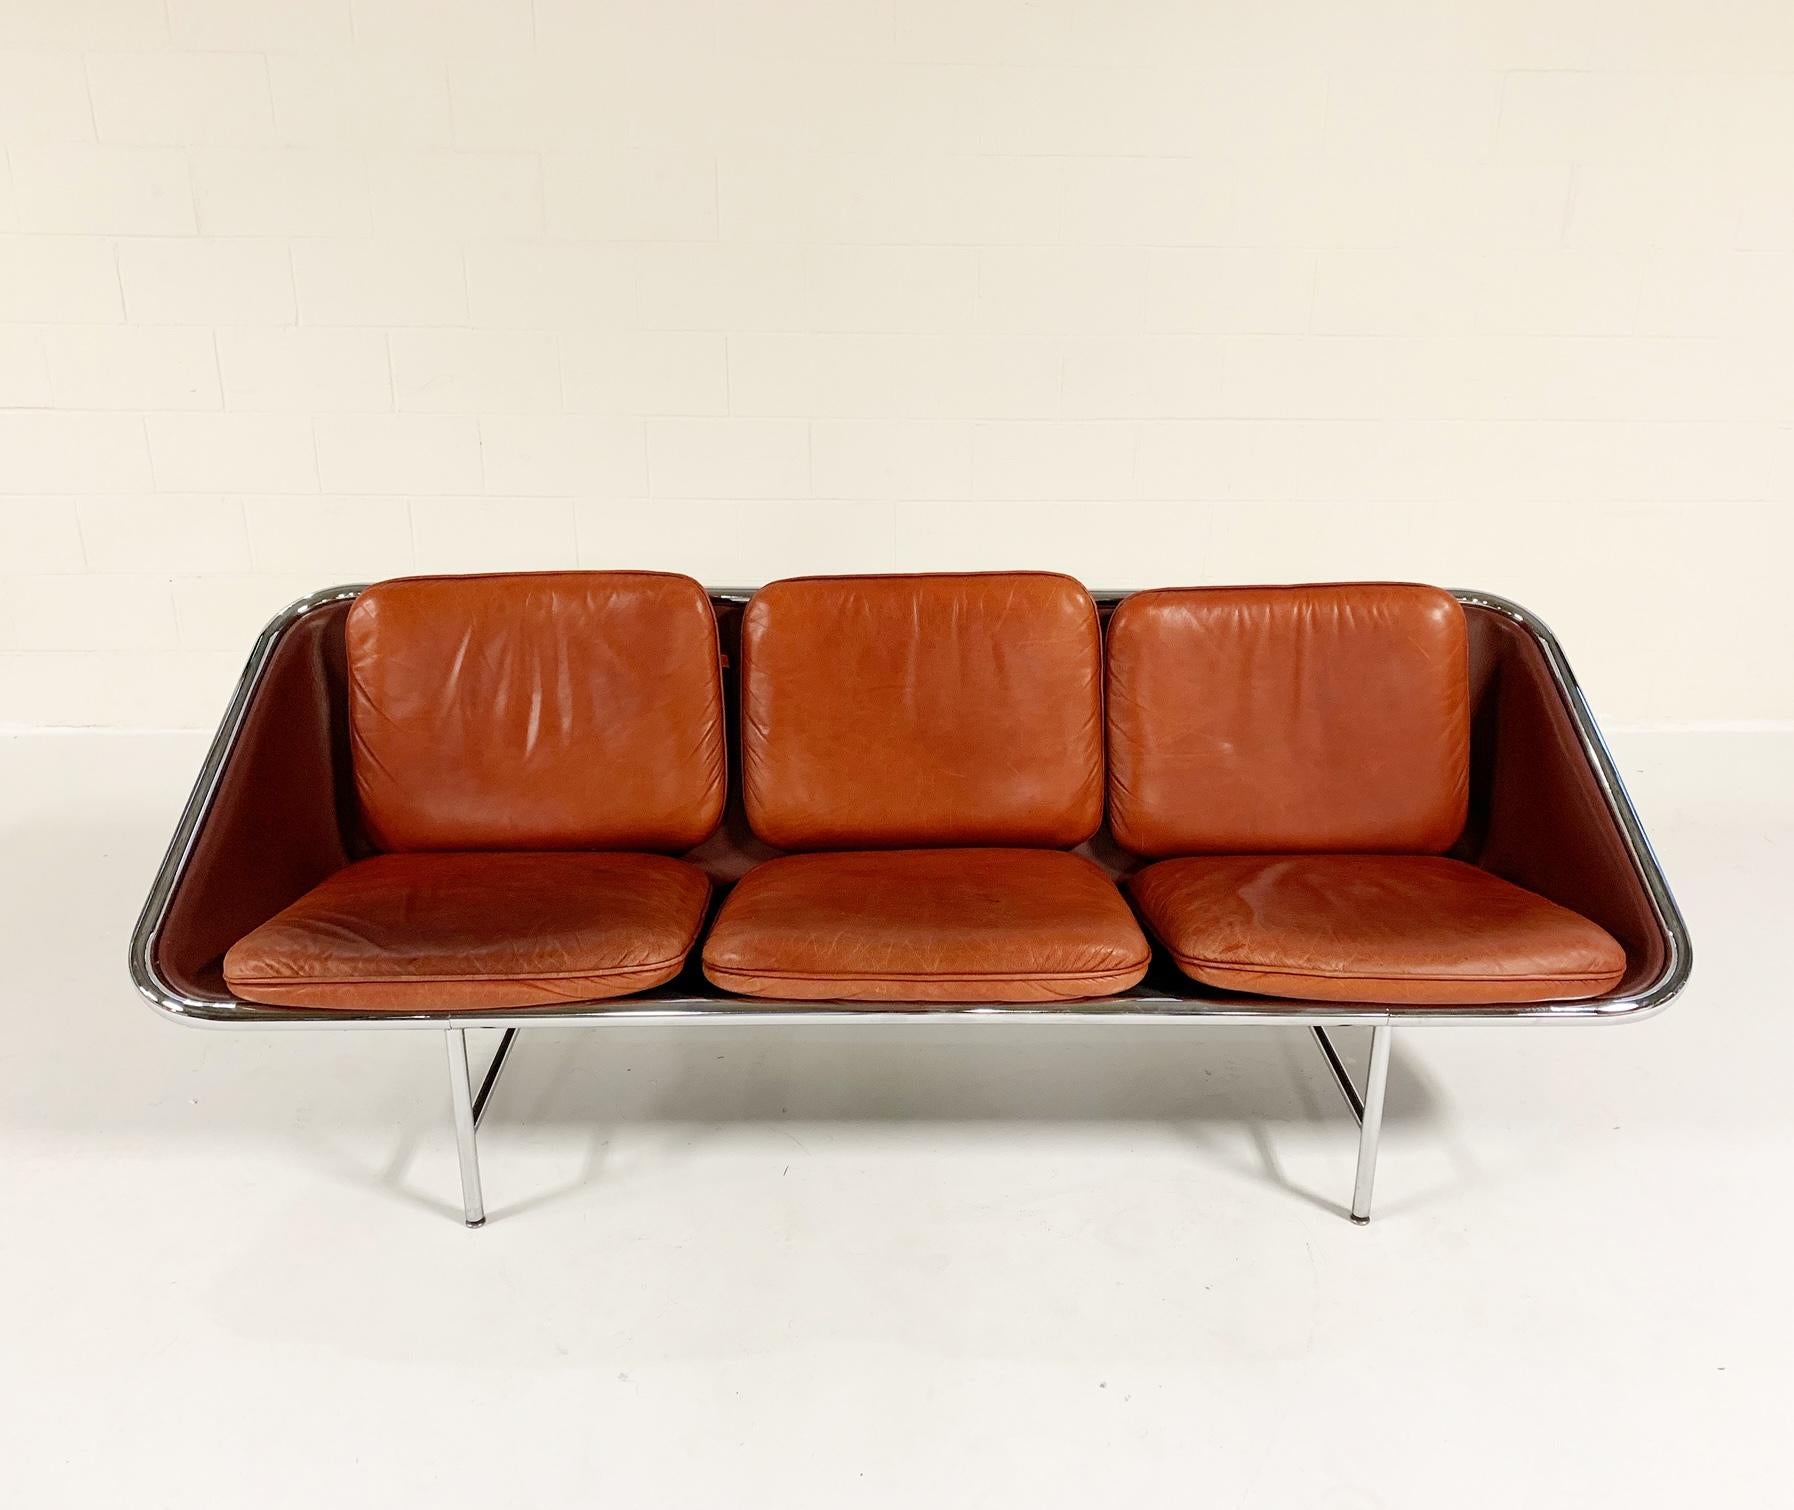 An exceptional piece of midcentury design. We fell in love with the exquisite lines of this Model 6832 leather sling sofa by George Nelson for Herman Miller. The chestnut leather is in great shape, showing a beautiful patina. Choose a few pillows